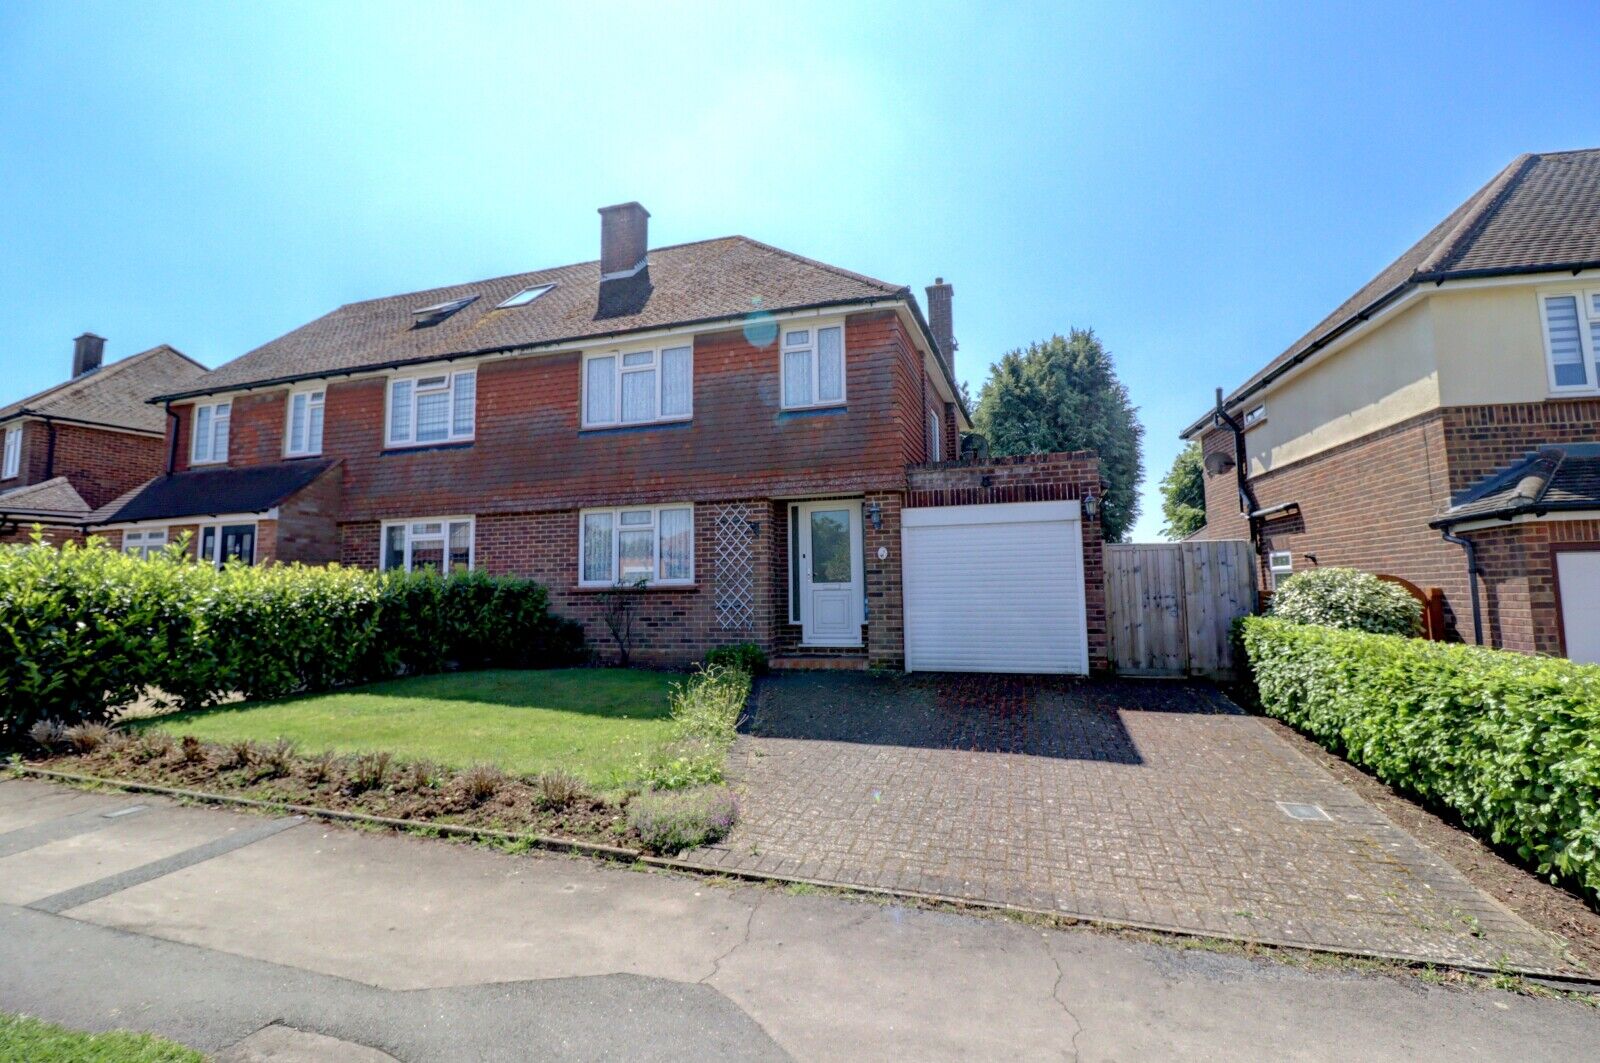 3 bedroom semi detached house for sale Kings Ride, High Wycombe, HP10, main image